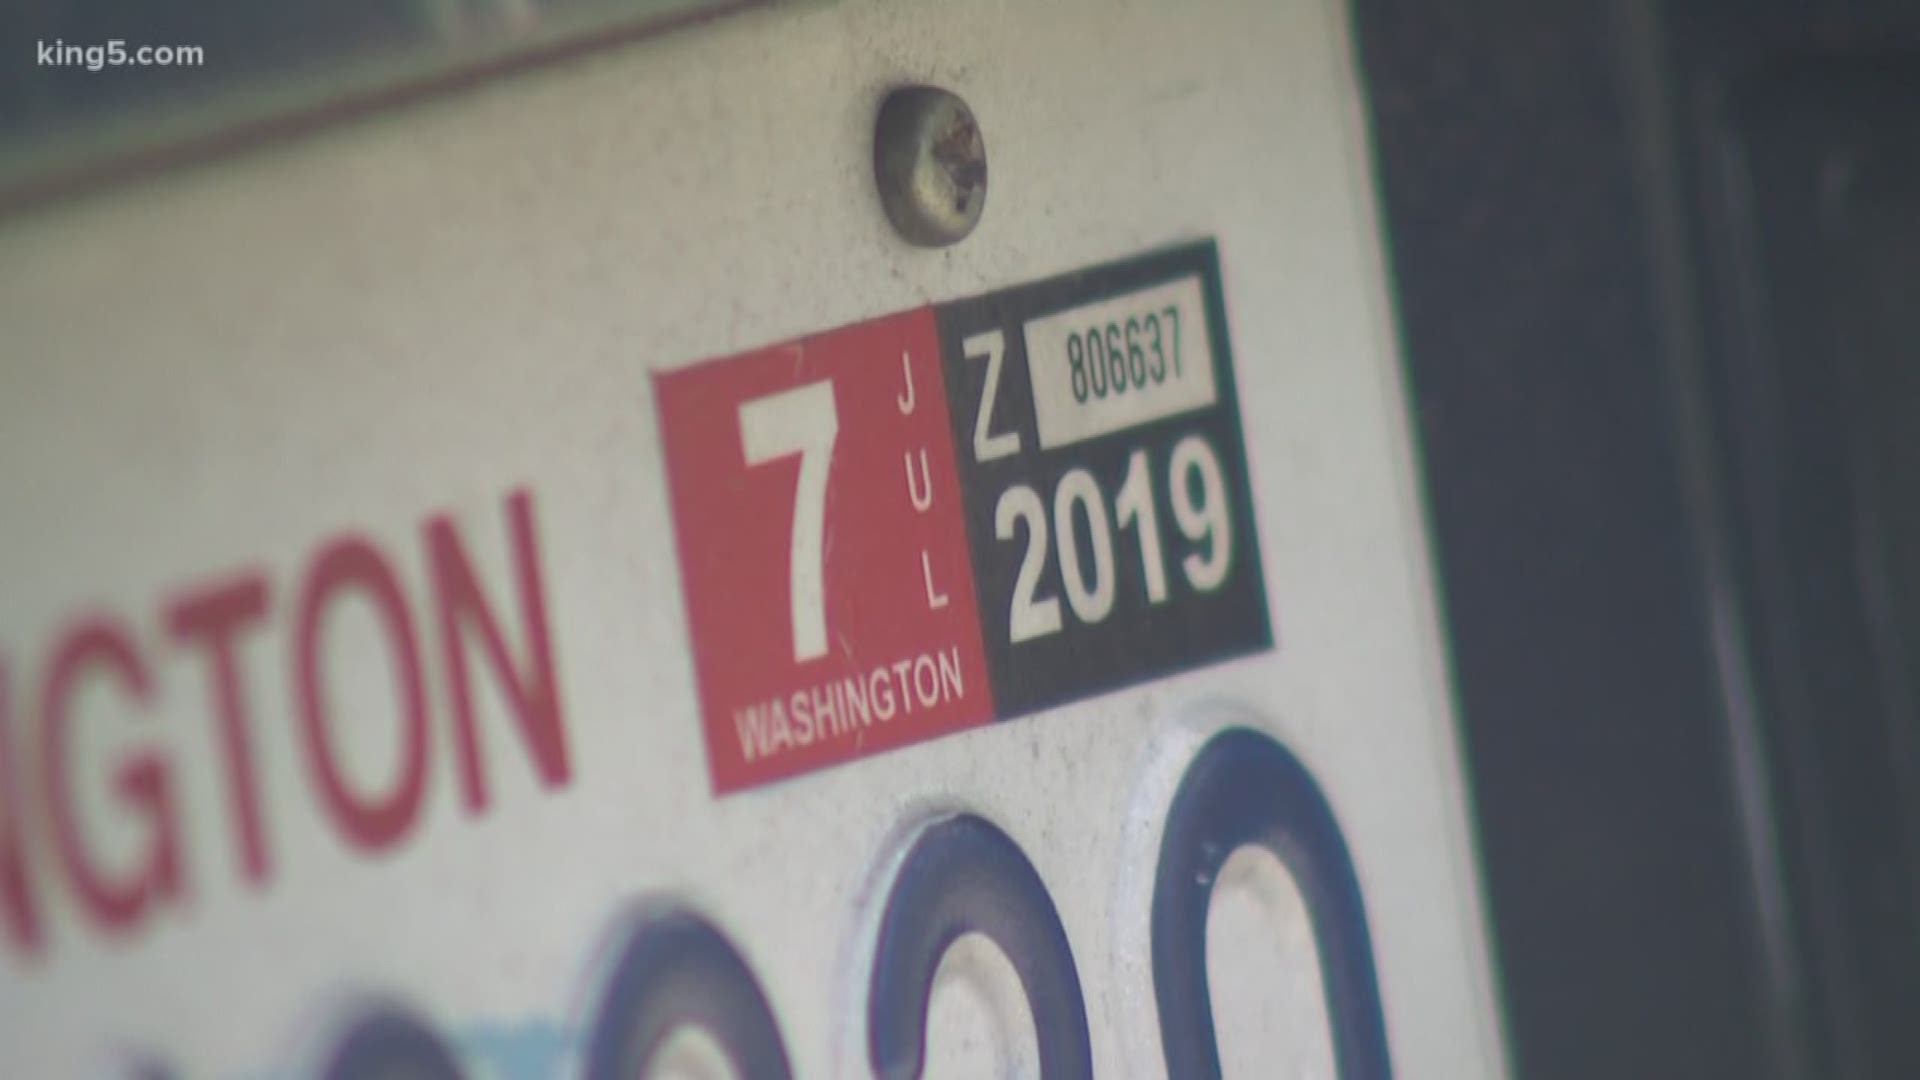 Initiative 976 would limit the amount of money the state can charge for vehicle tabs to $30. Officials claim I-976 would be detrimental to transportation projects.